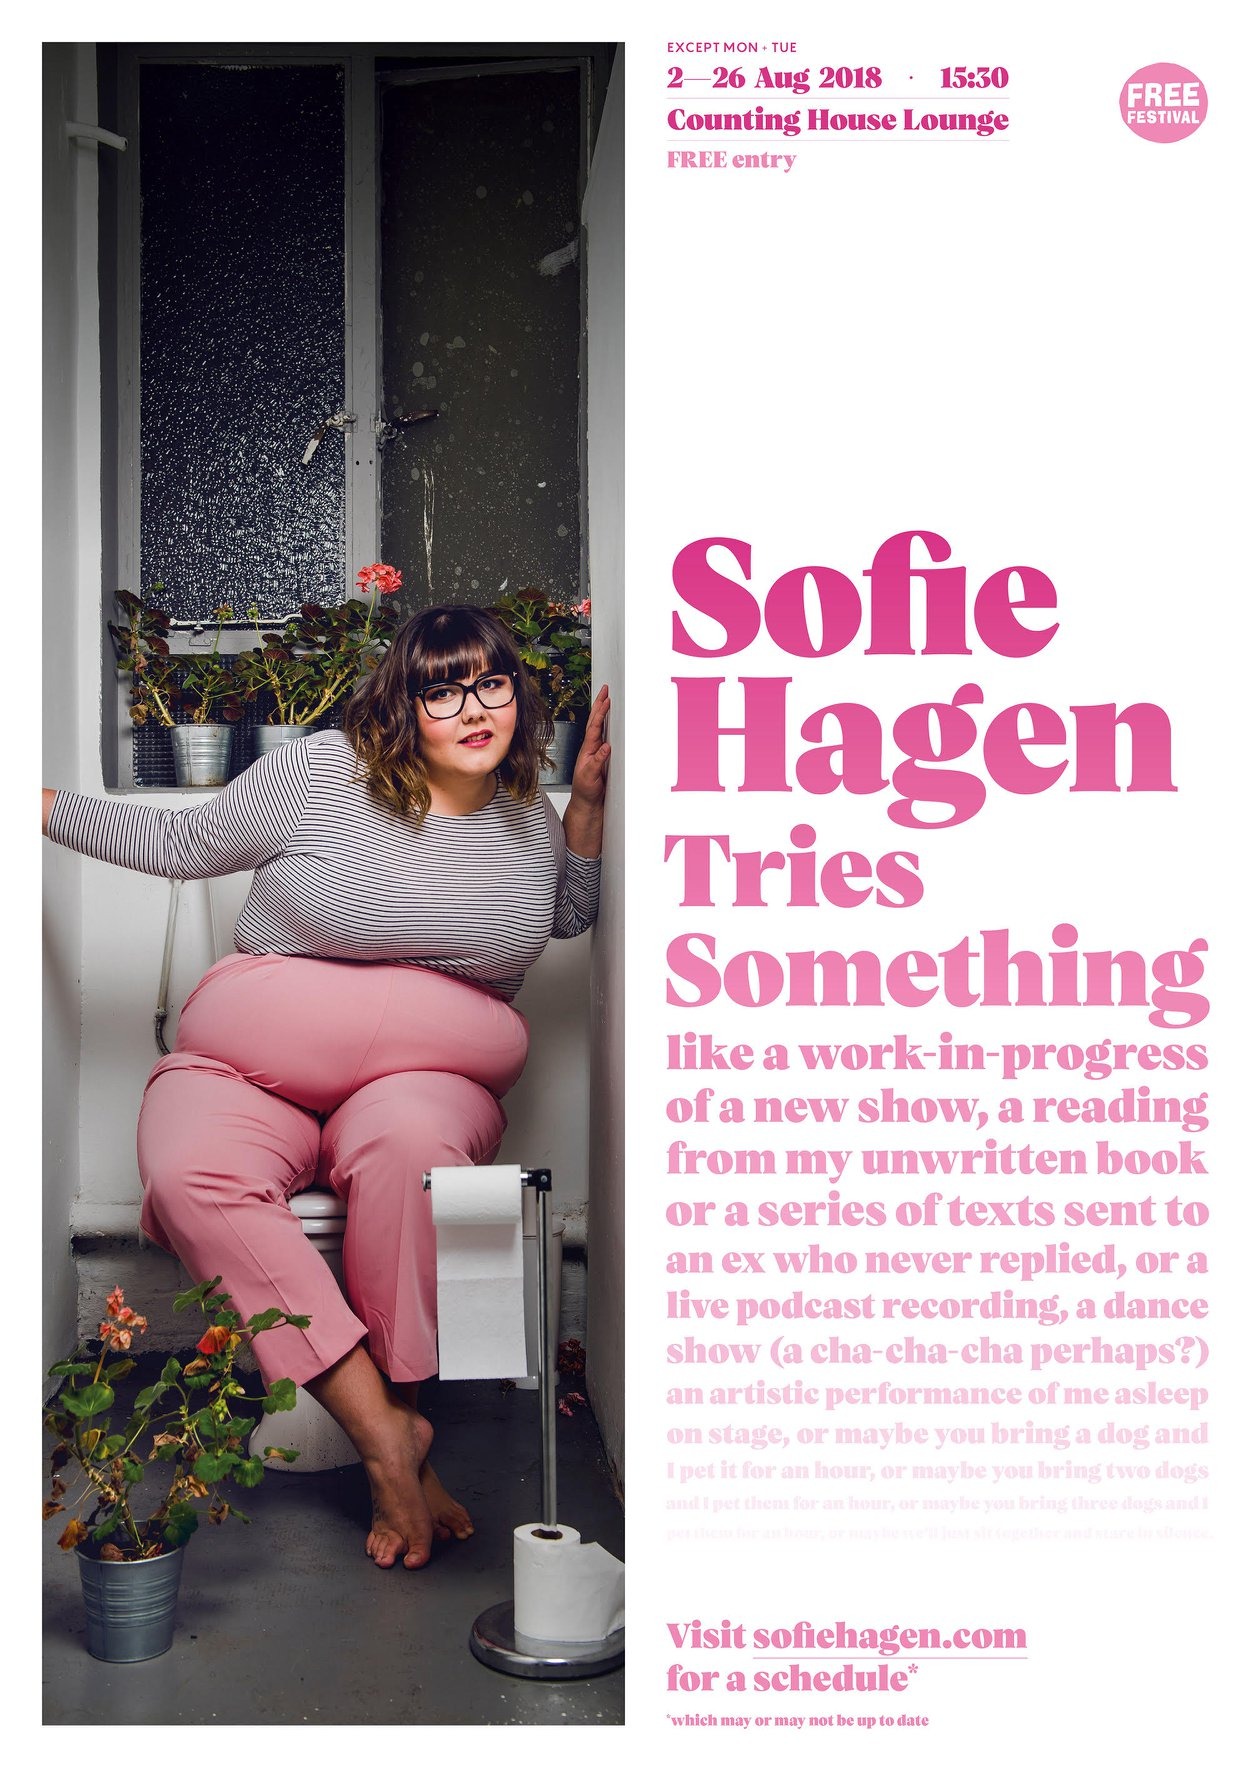 The poster for Sofie Hagen Tries Something